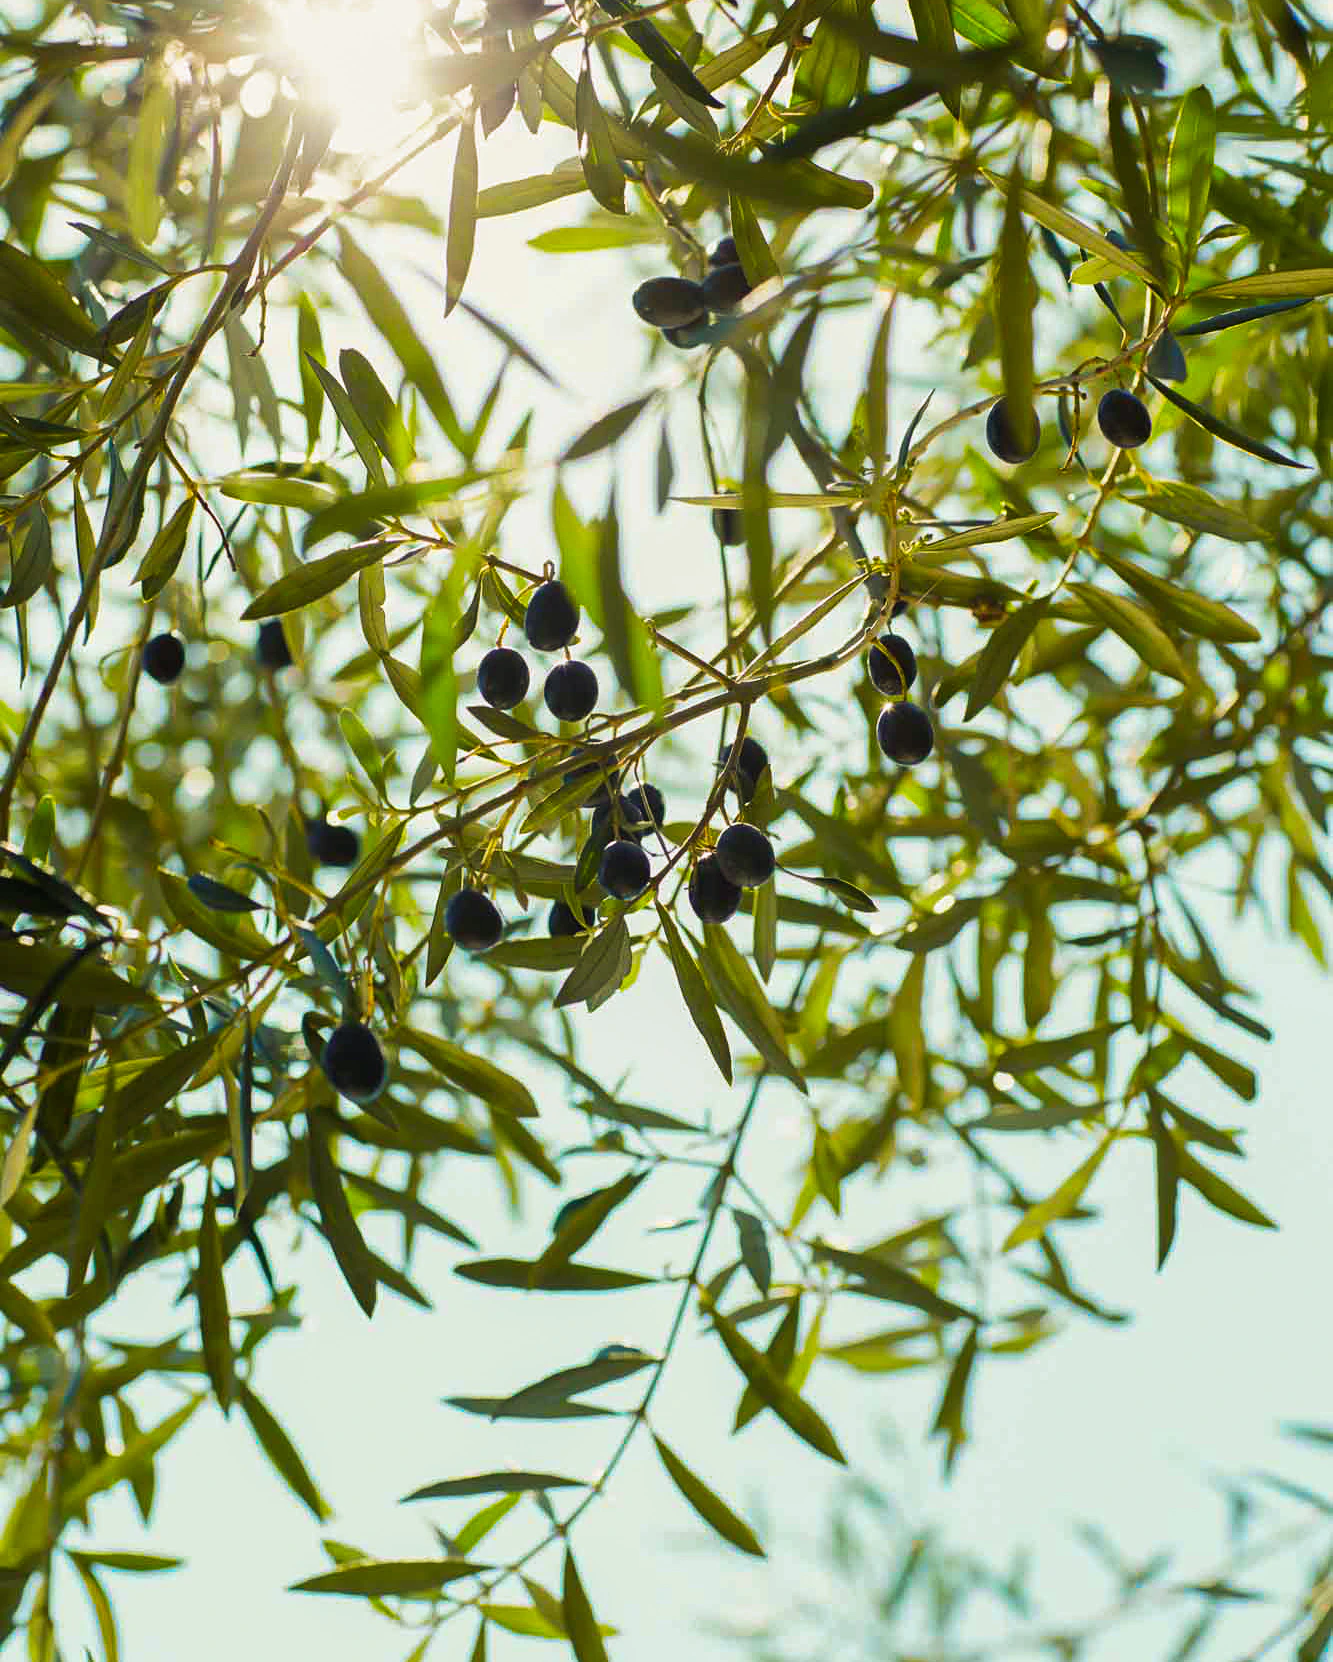 Black olives growing on an olive tree.